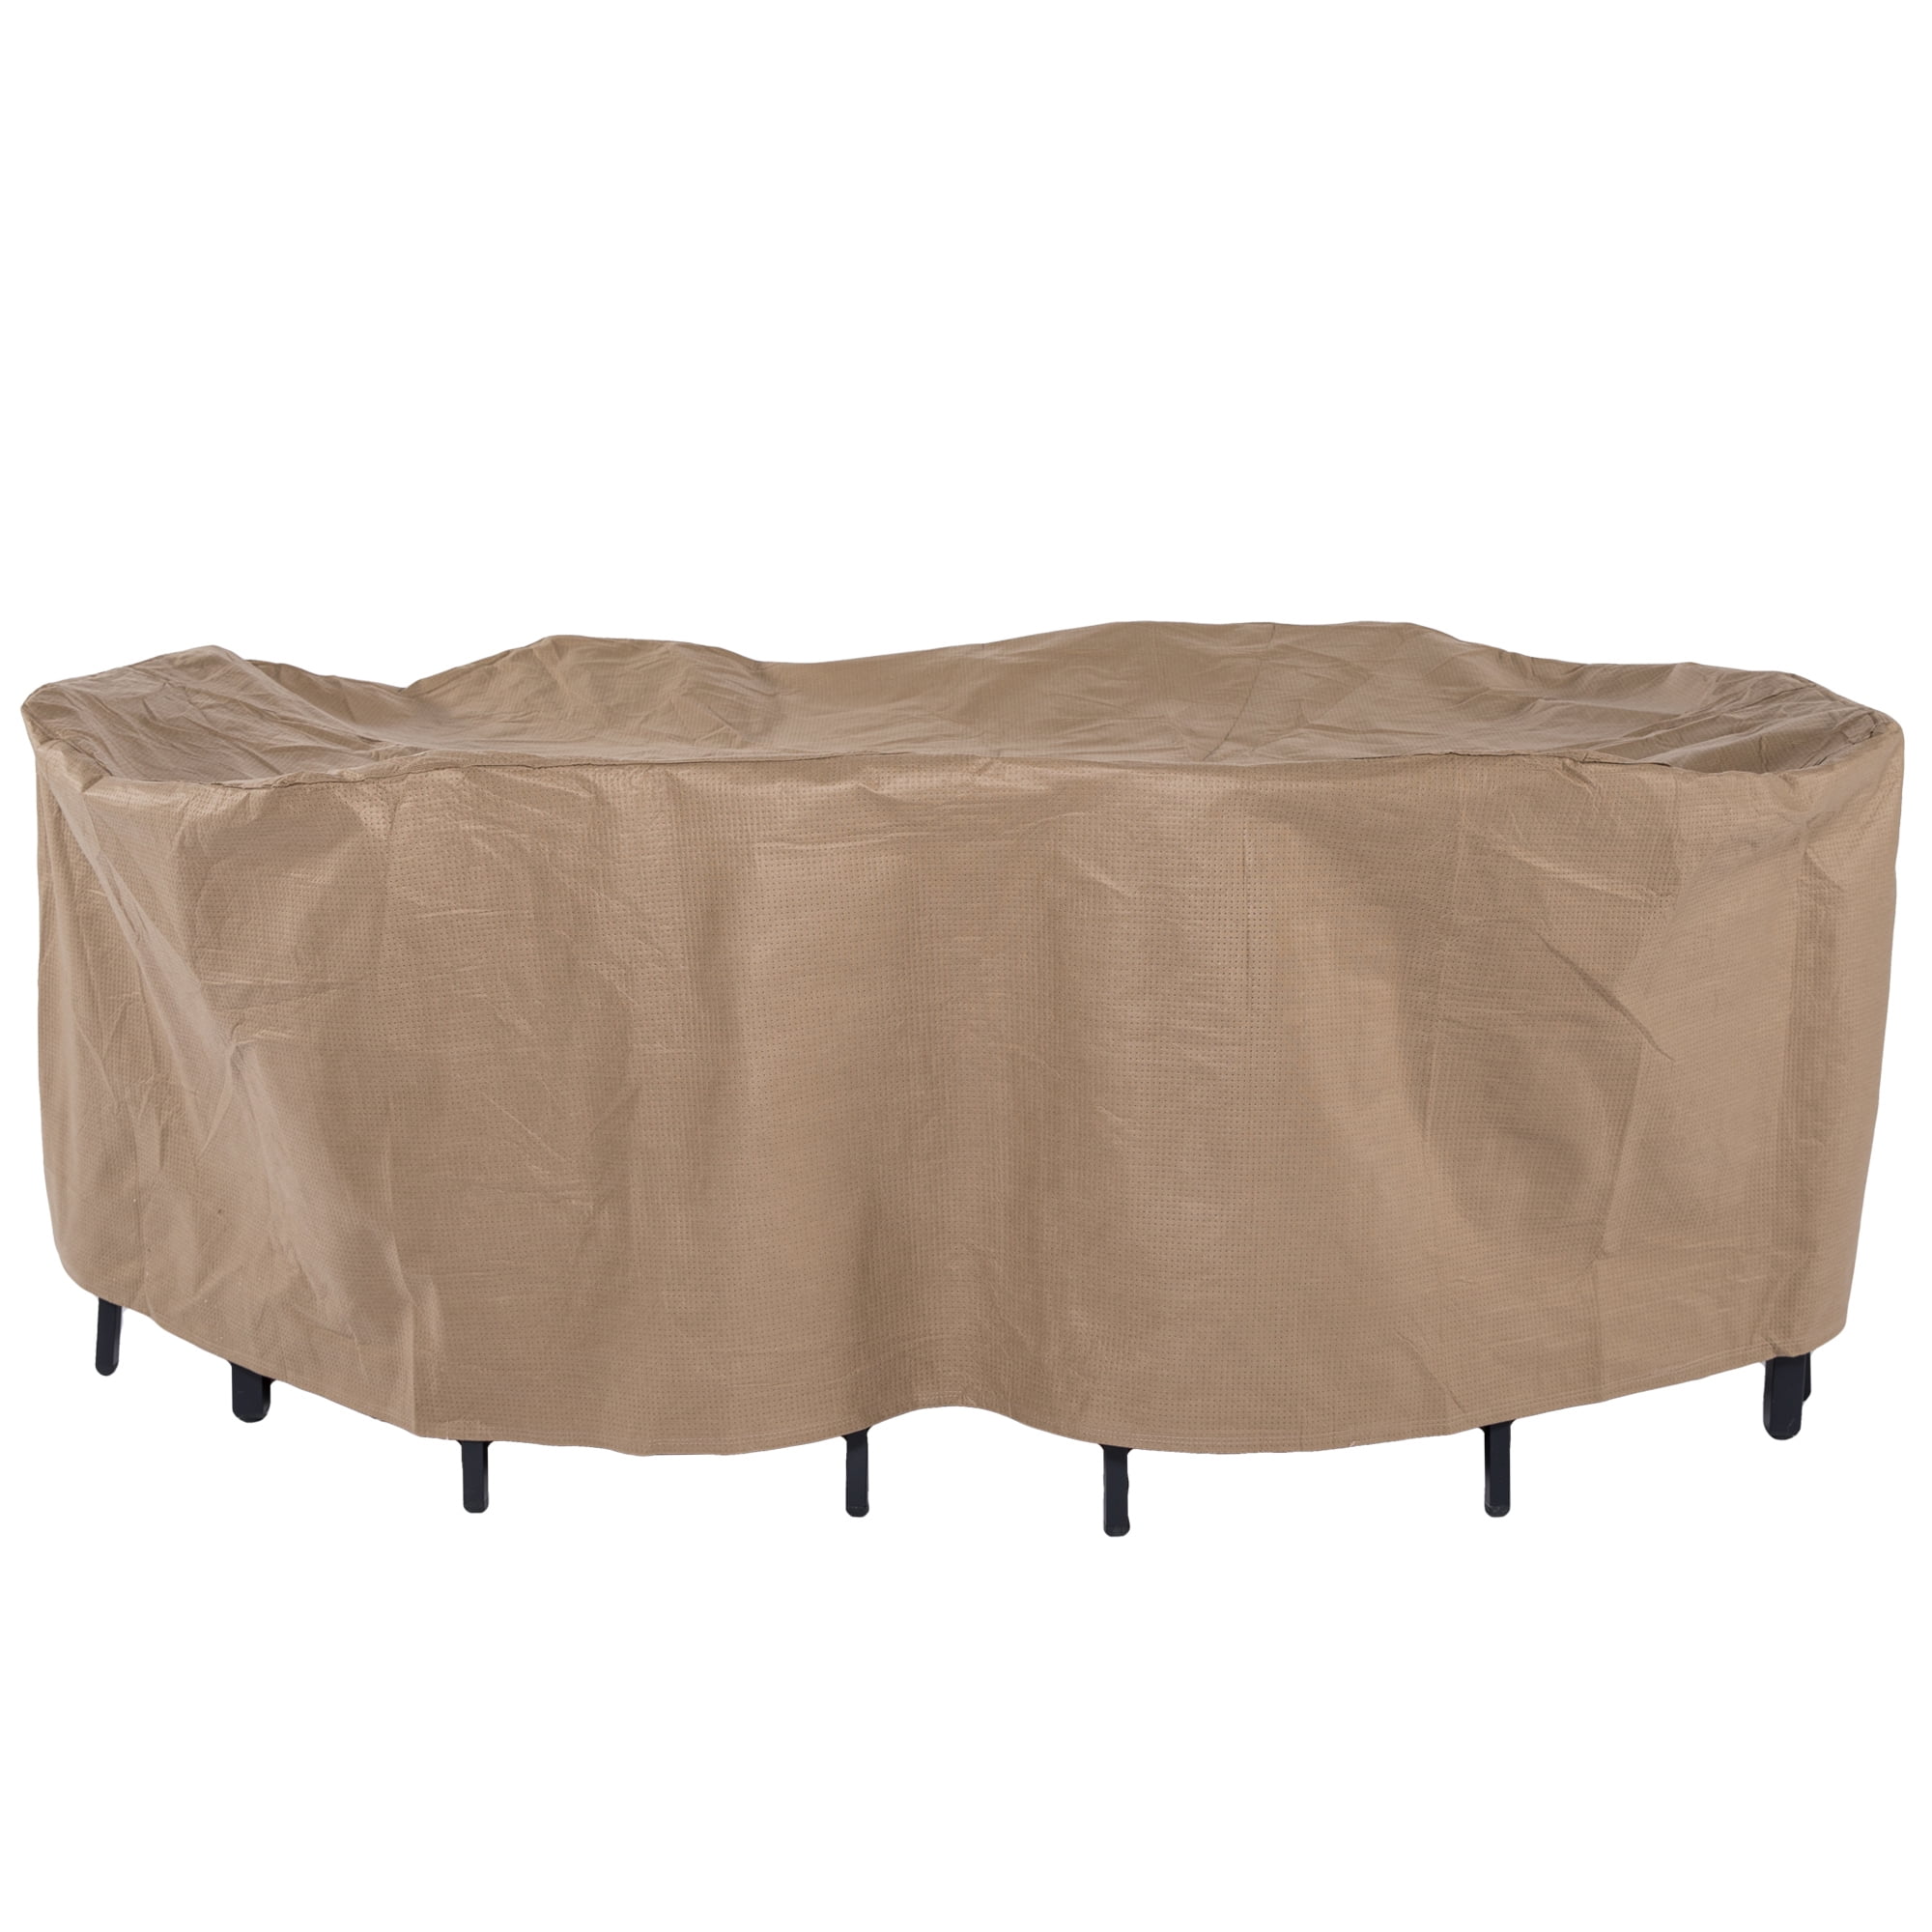 Duck Covers Essential Rectangle/Oval Patio Table with Chairs Cover 96-Inch 